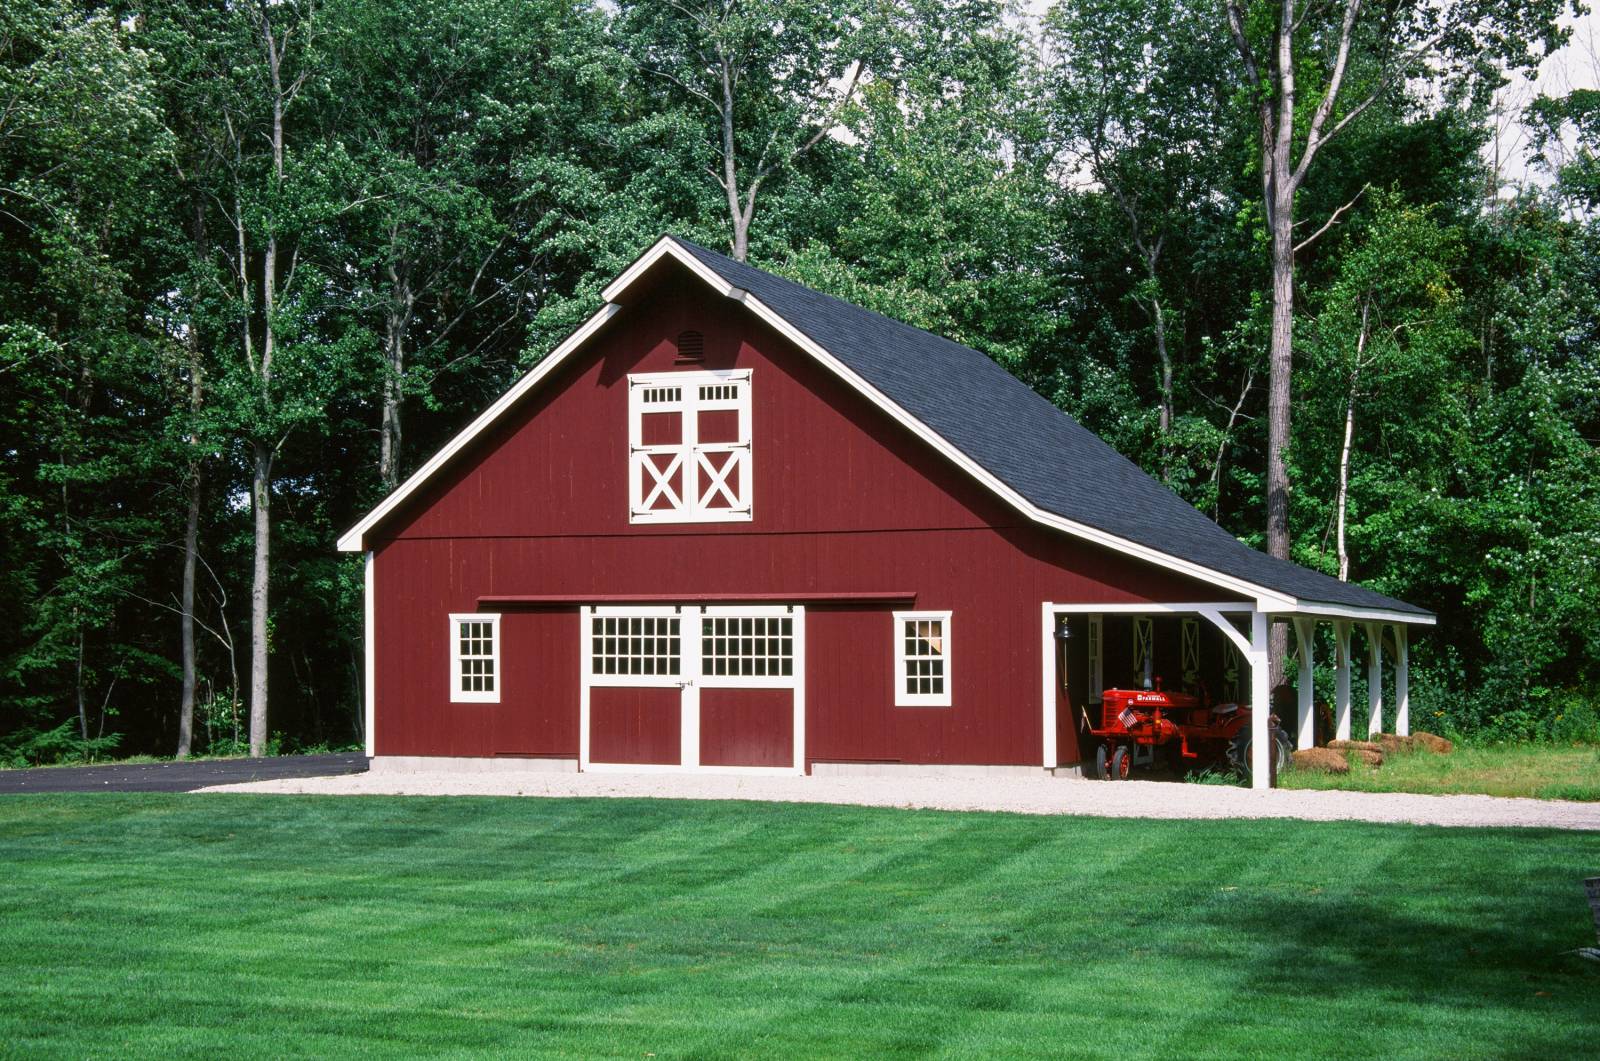 Post & Beam Barn in a Country Setting